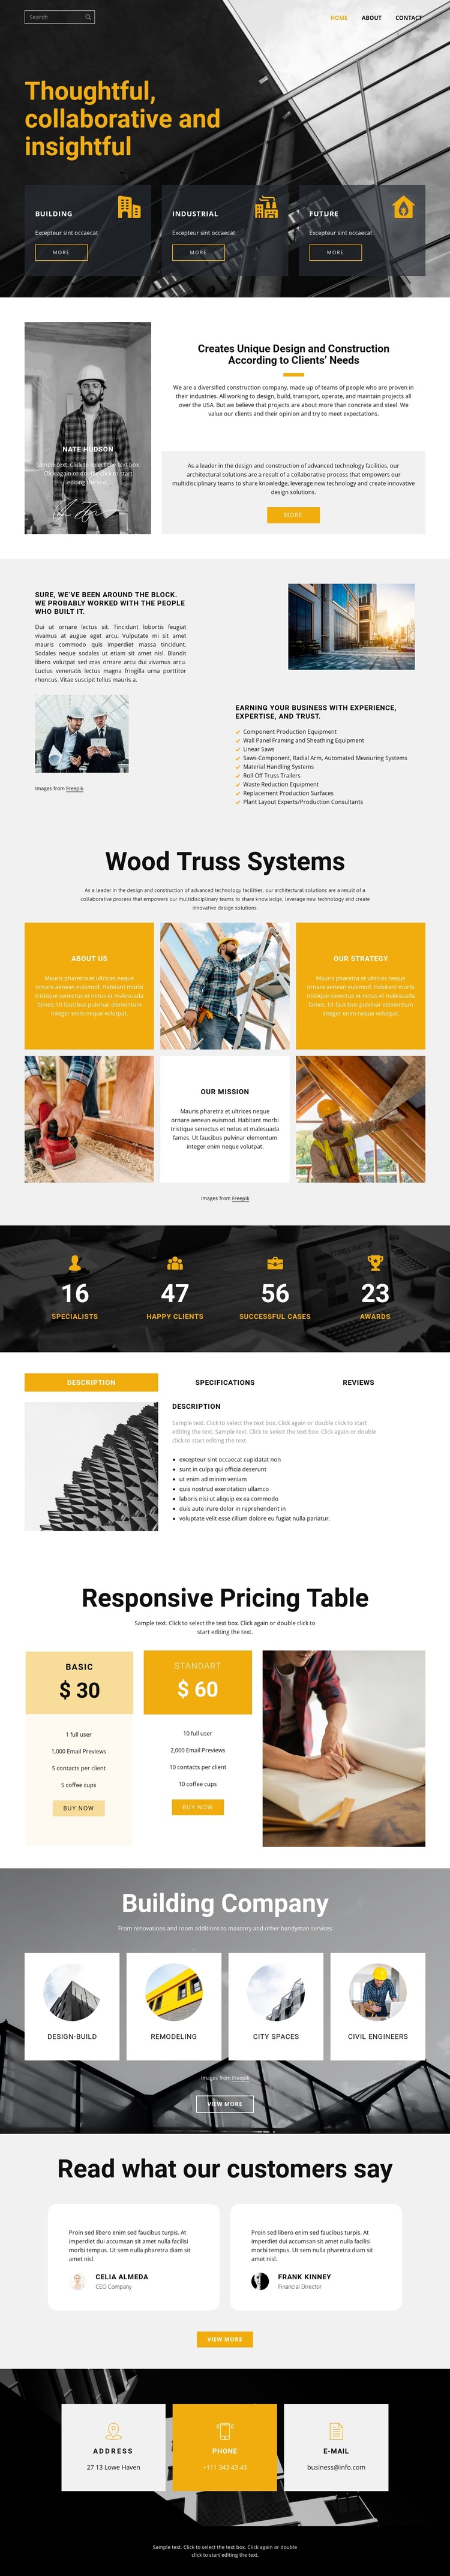 Thoughtful, collaborative and insightful HTML5 Template